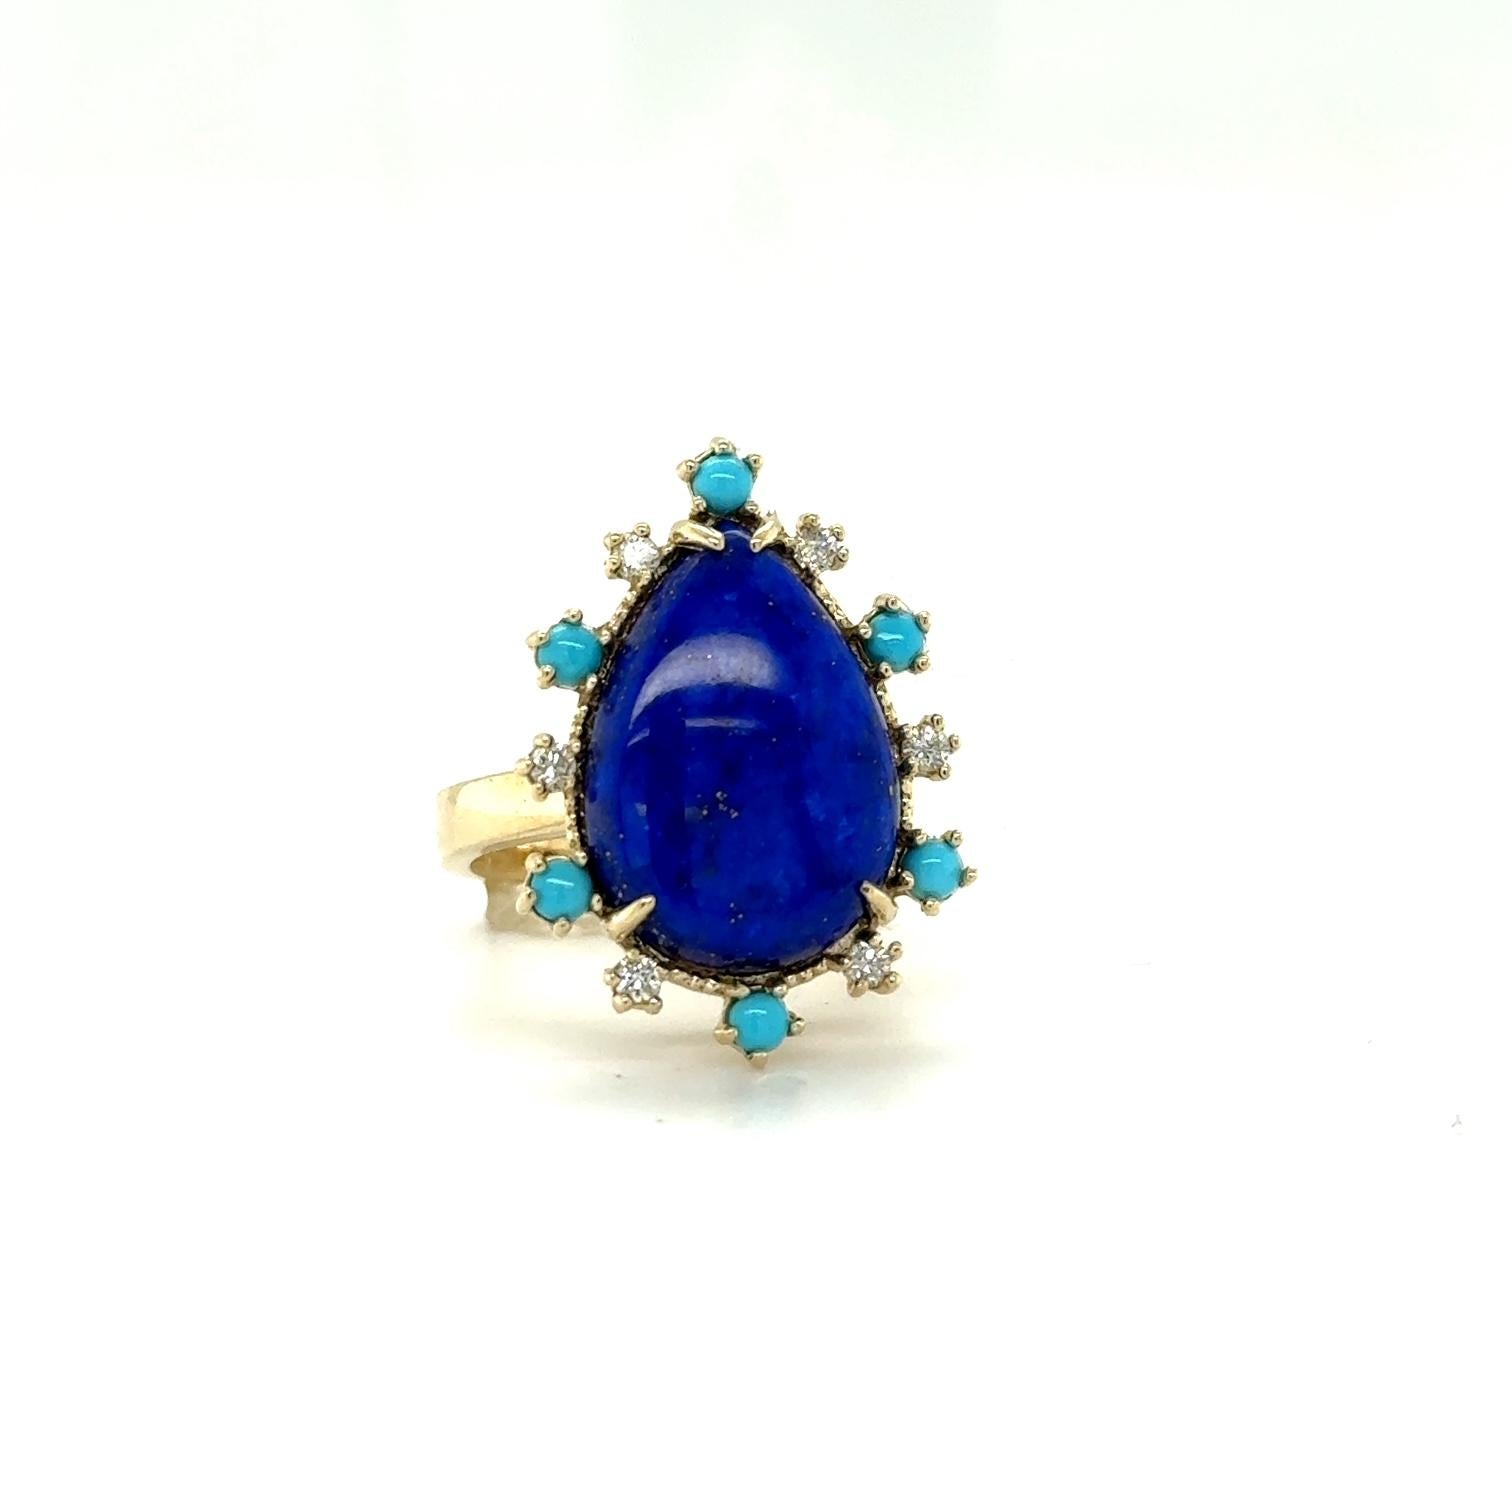 8.35 Carat Lapis Lazuli Turquoise and Diamond Yellow Gold Cocktail Ring

A beauty to say the least! This unique ring has a beautiful deep blue/purple Pear Cut Lapis Lazuli that weighs 7.80 Carats. It is surrounded by 6 Turquoise that weigh 0.38